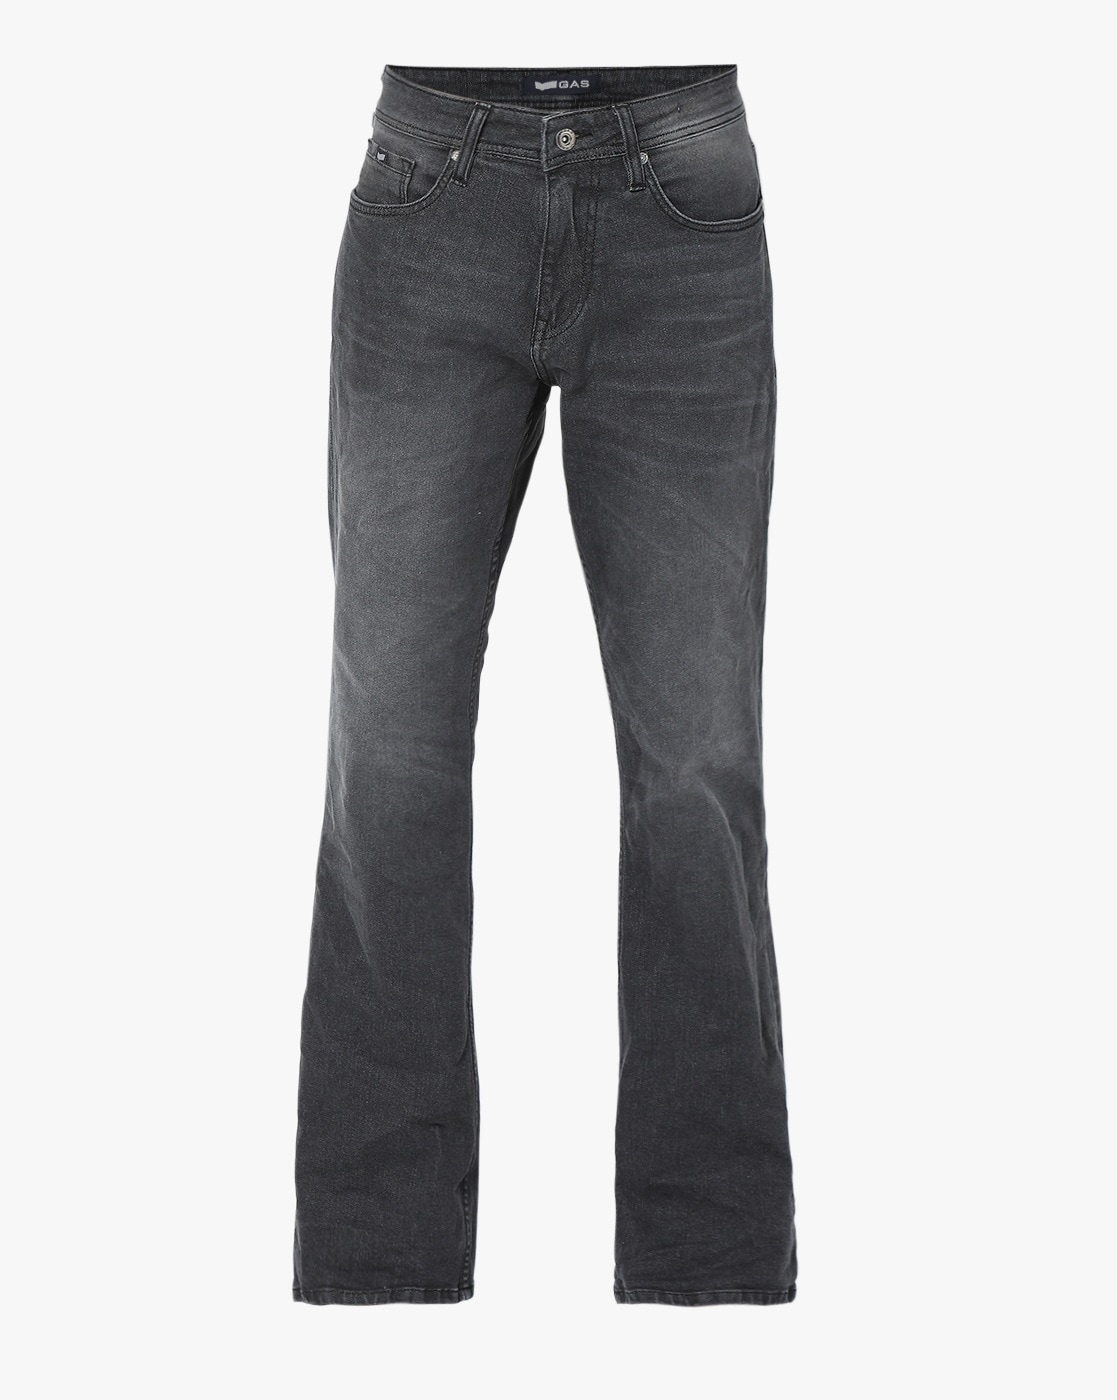 Plain Blue Men Bell Bottom Jeans, Straight Fit at Rs 340/piece in New Delhi  | ID: 2852890357391